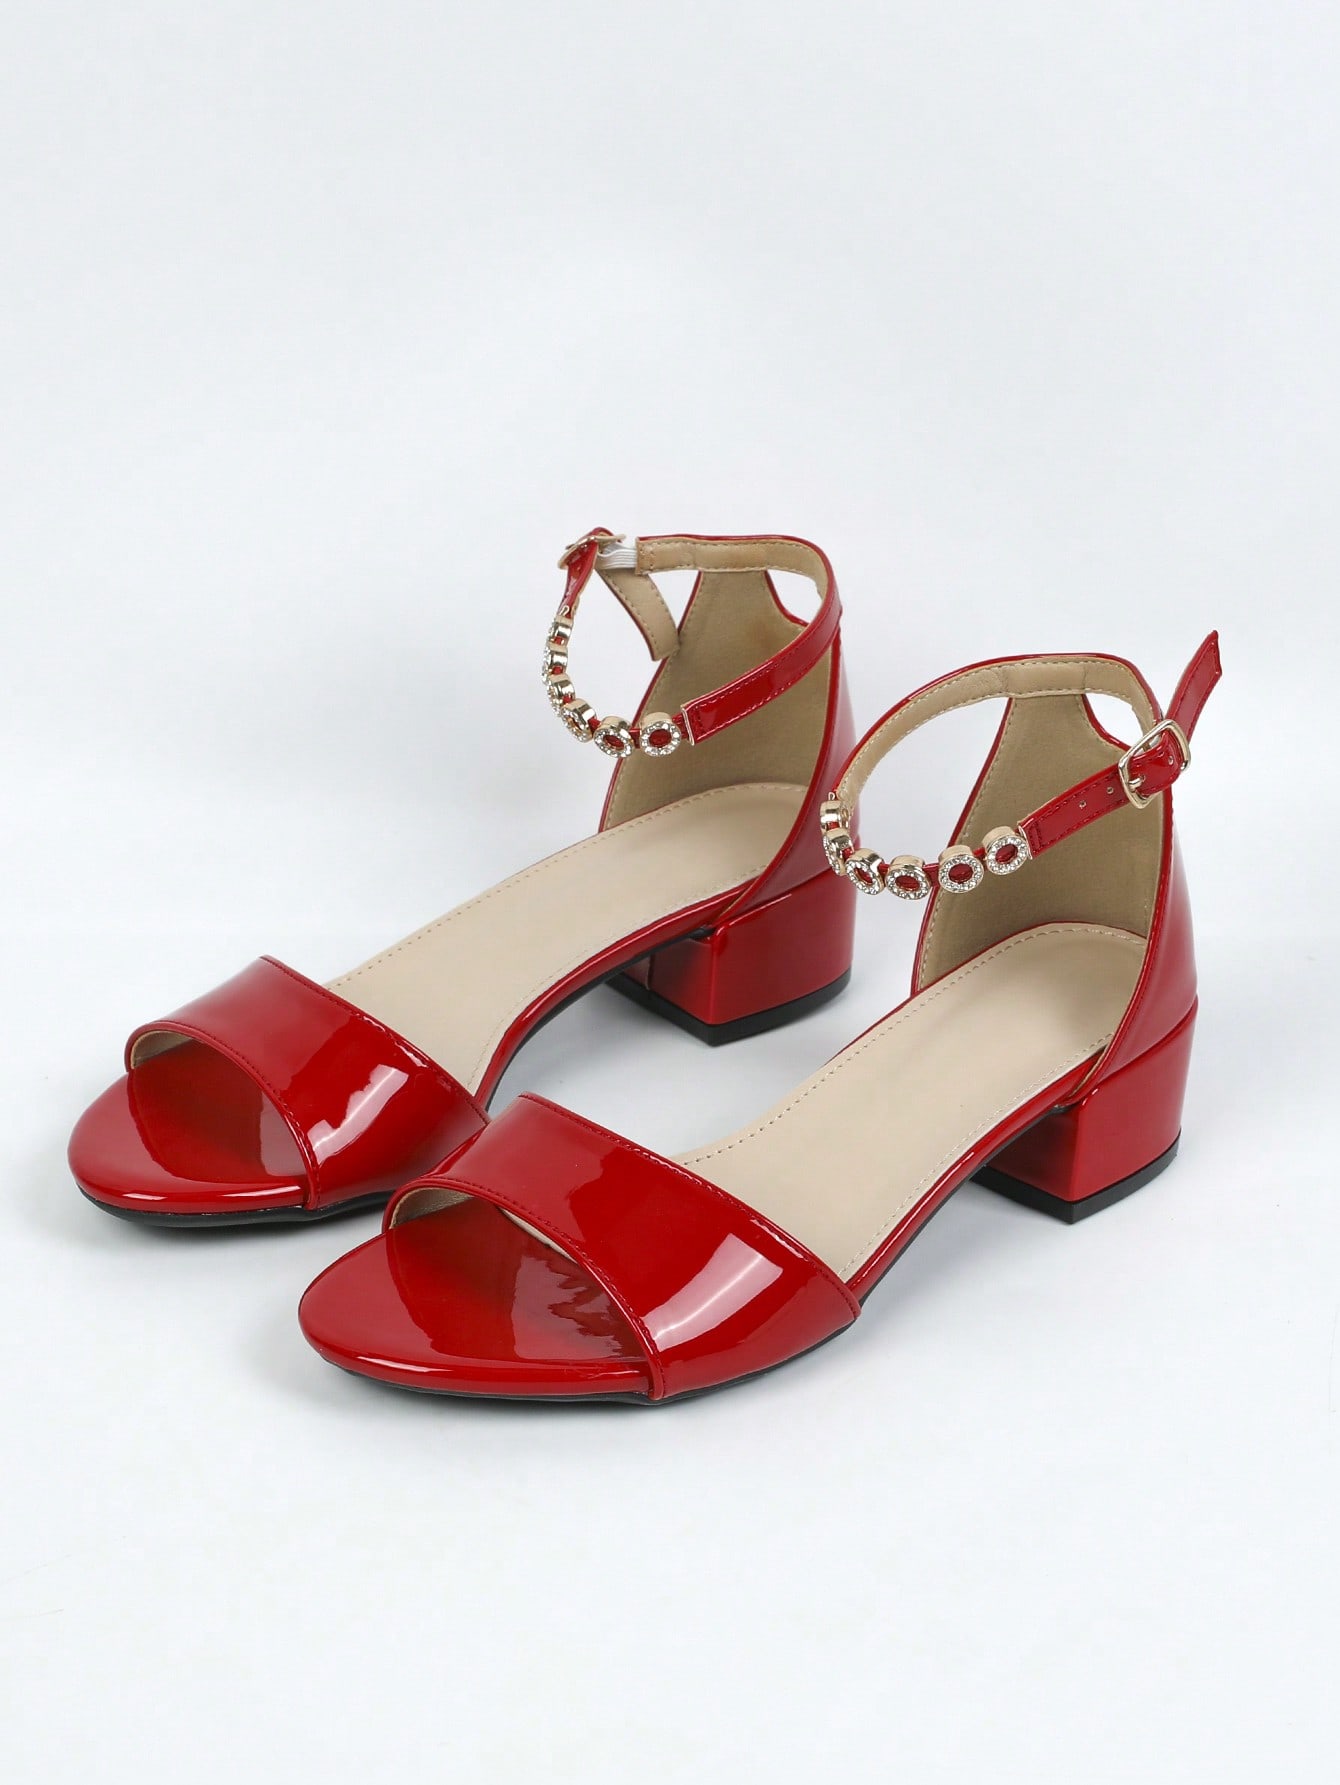 Fashionable & Comfortable Women's Red Ankle Strap High Heeled Sandals With Rhinestone Decoration